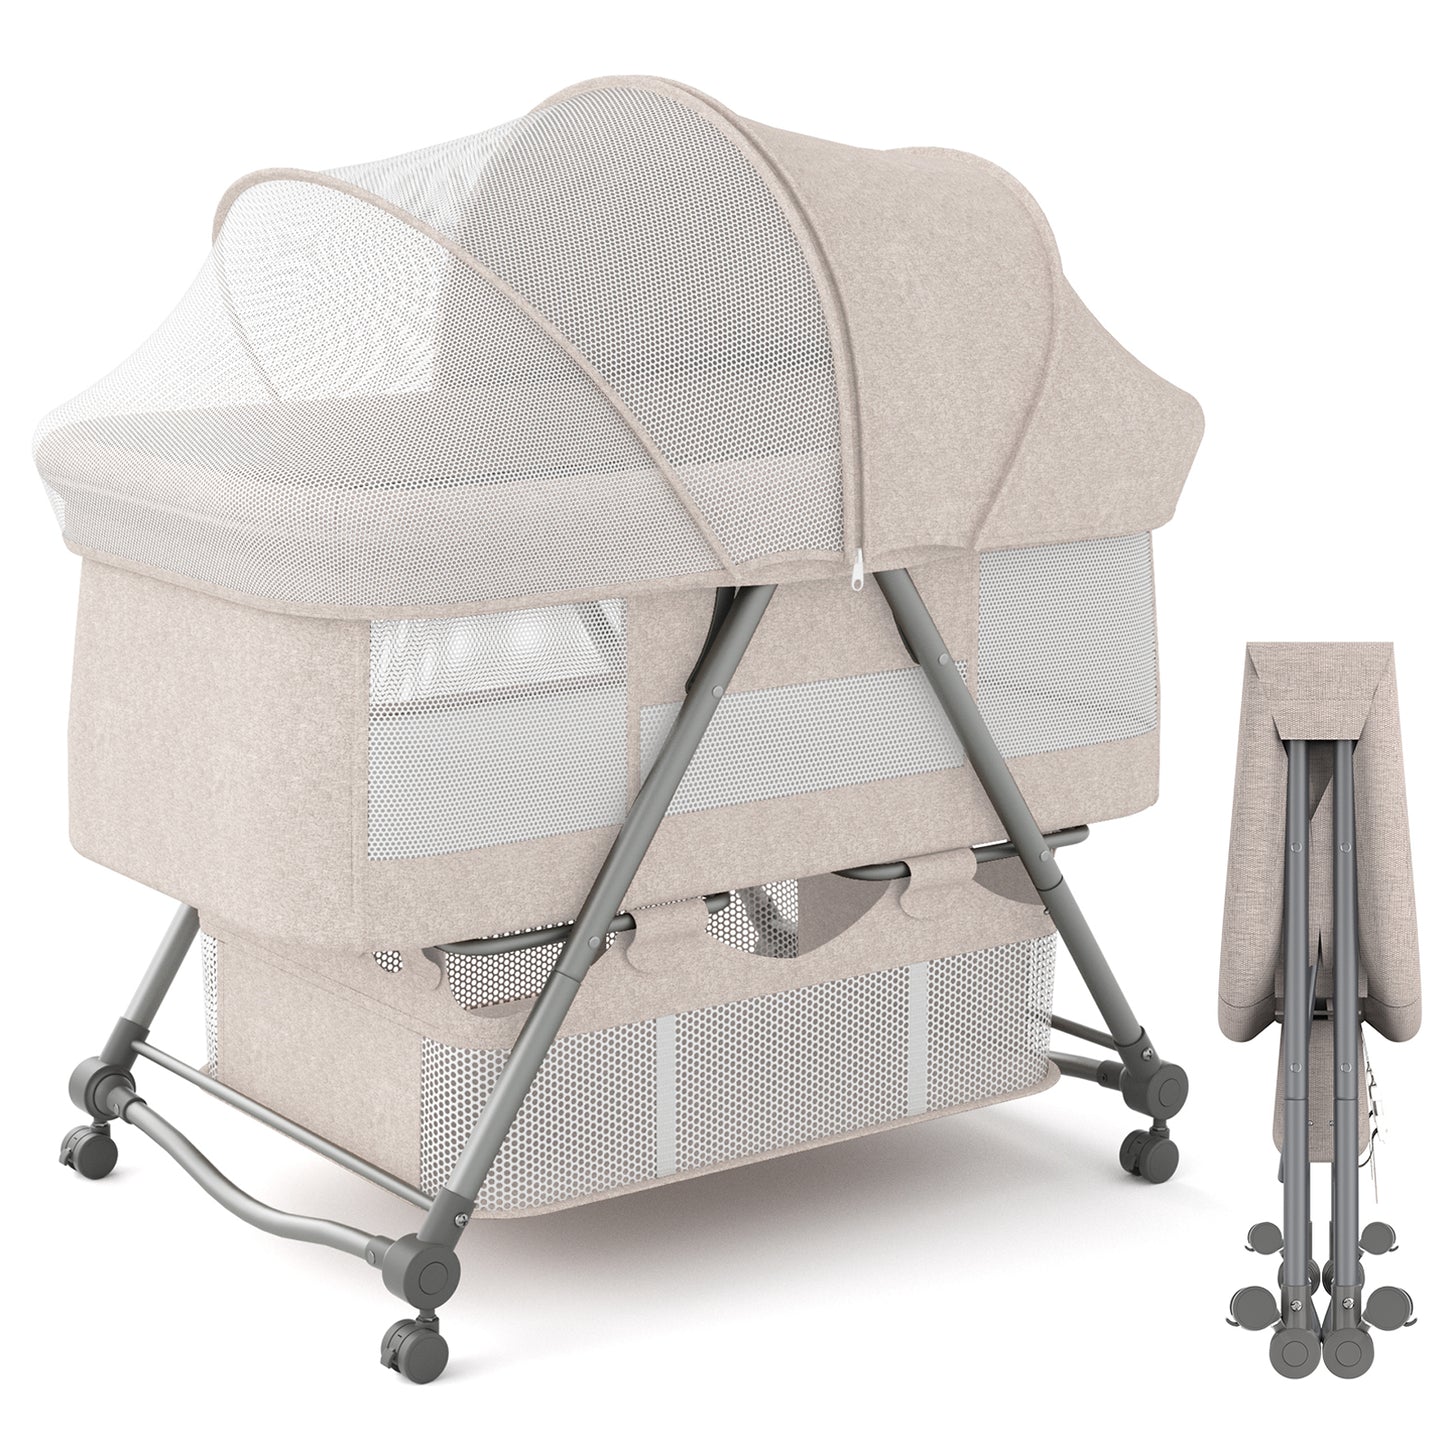 XJD Baby Bassinets Bedside Sleeper Portable Baby Crib for Toddler with Storage Basket Easy Folding Bedside Crib with Breathable Mattress Adjustable Height for Newborn Infant Baby Boy Baby Girl, Beige